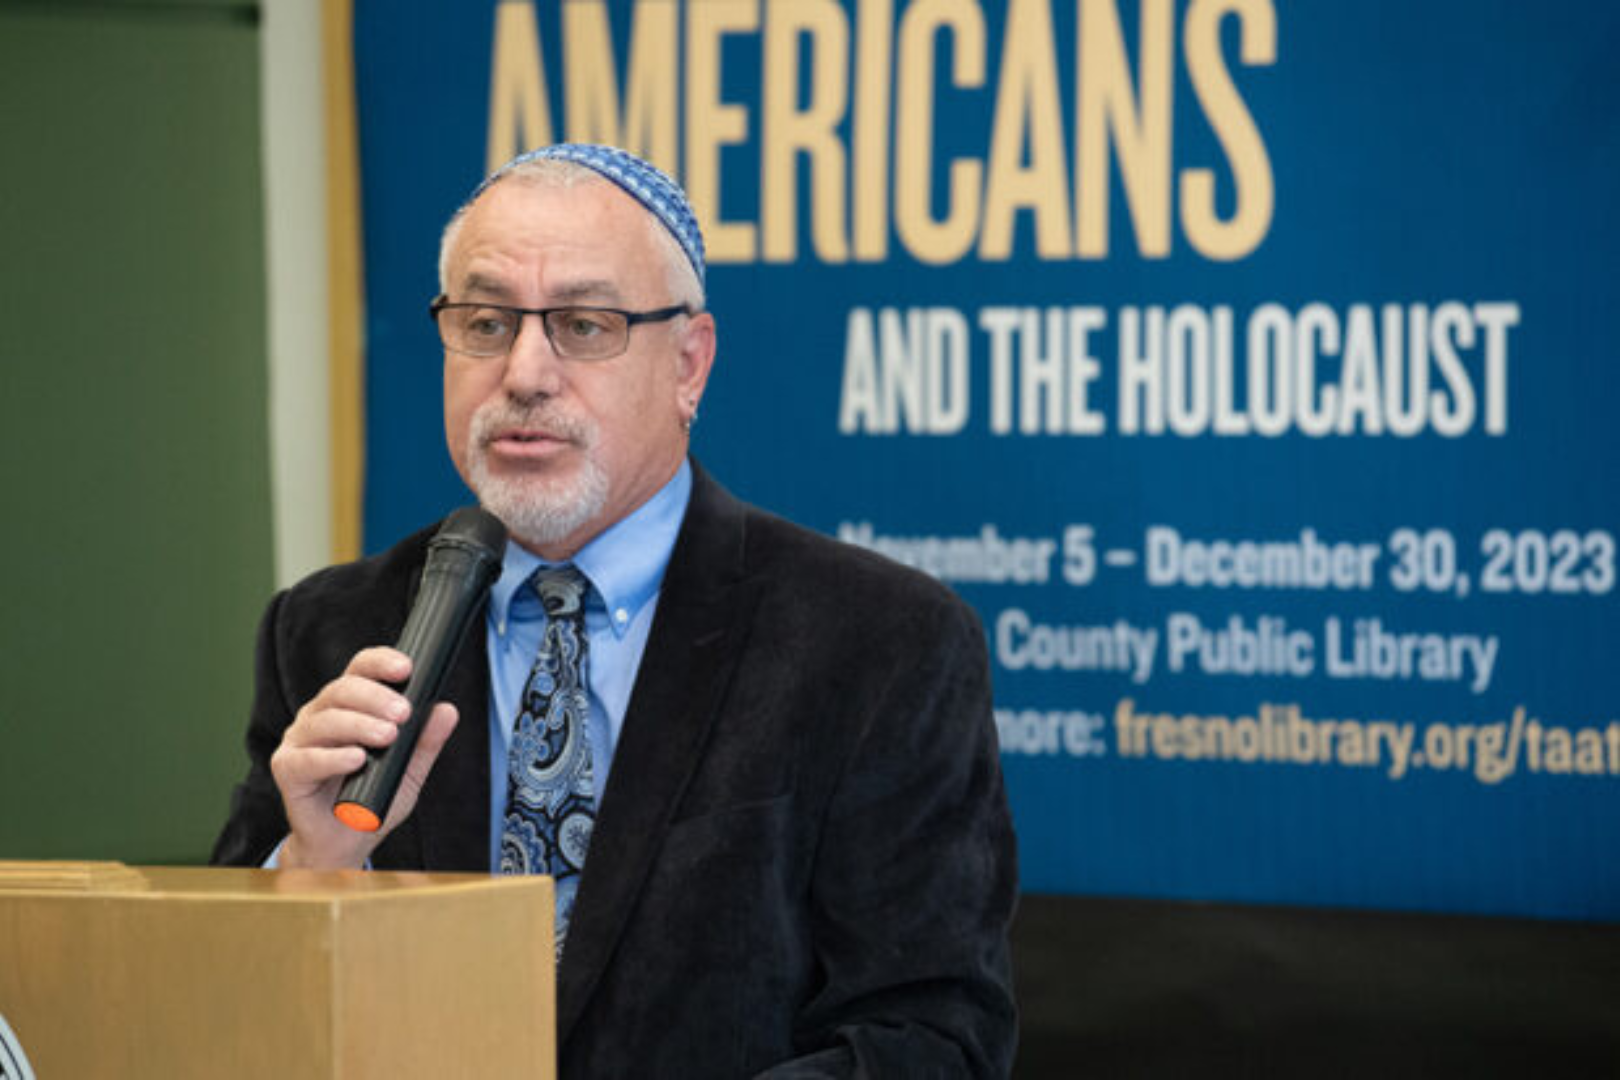 Rabbi Rick Winer speaks at the opening of the “Americans and the Holocaust” exhibit at the Fresno Central Library on Nov. 5. Photo by Peter Maiden